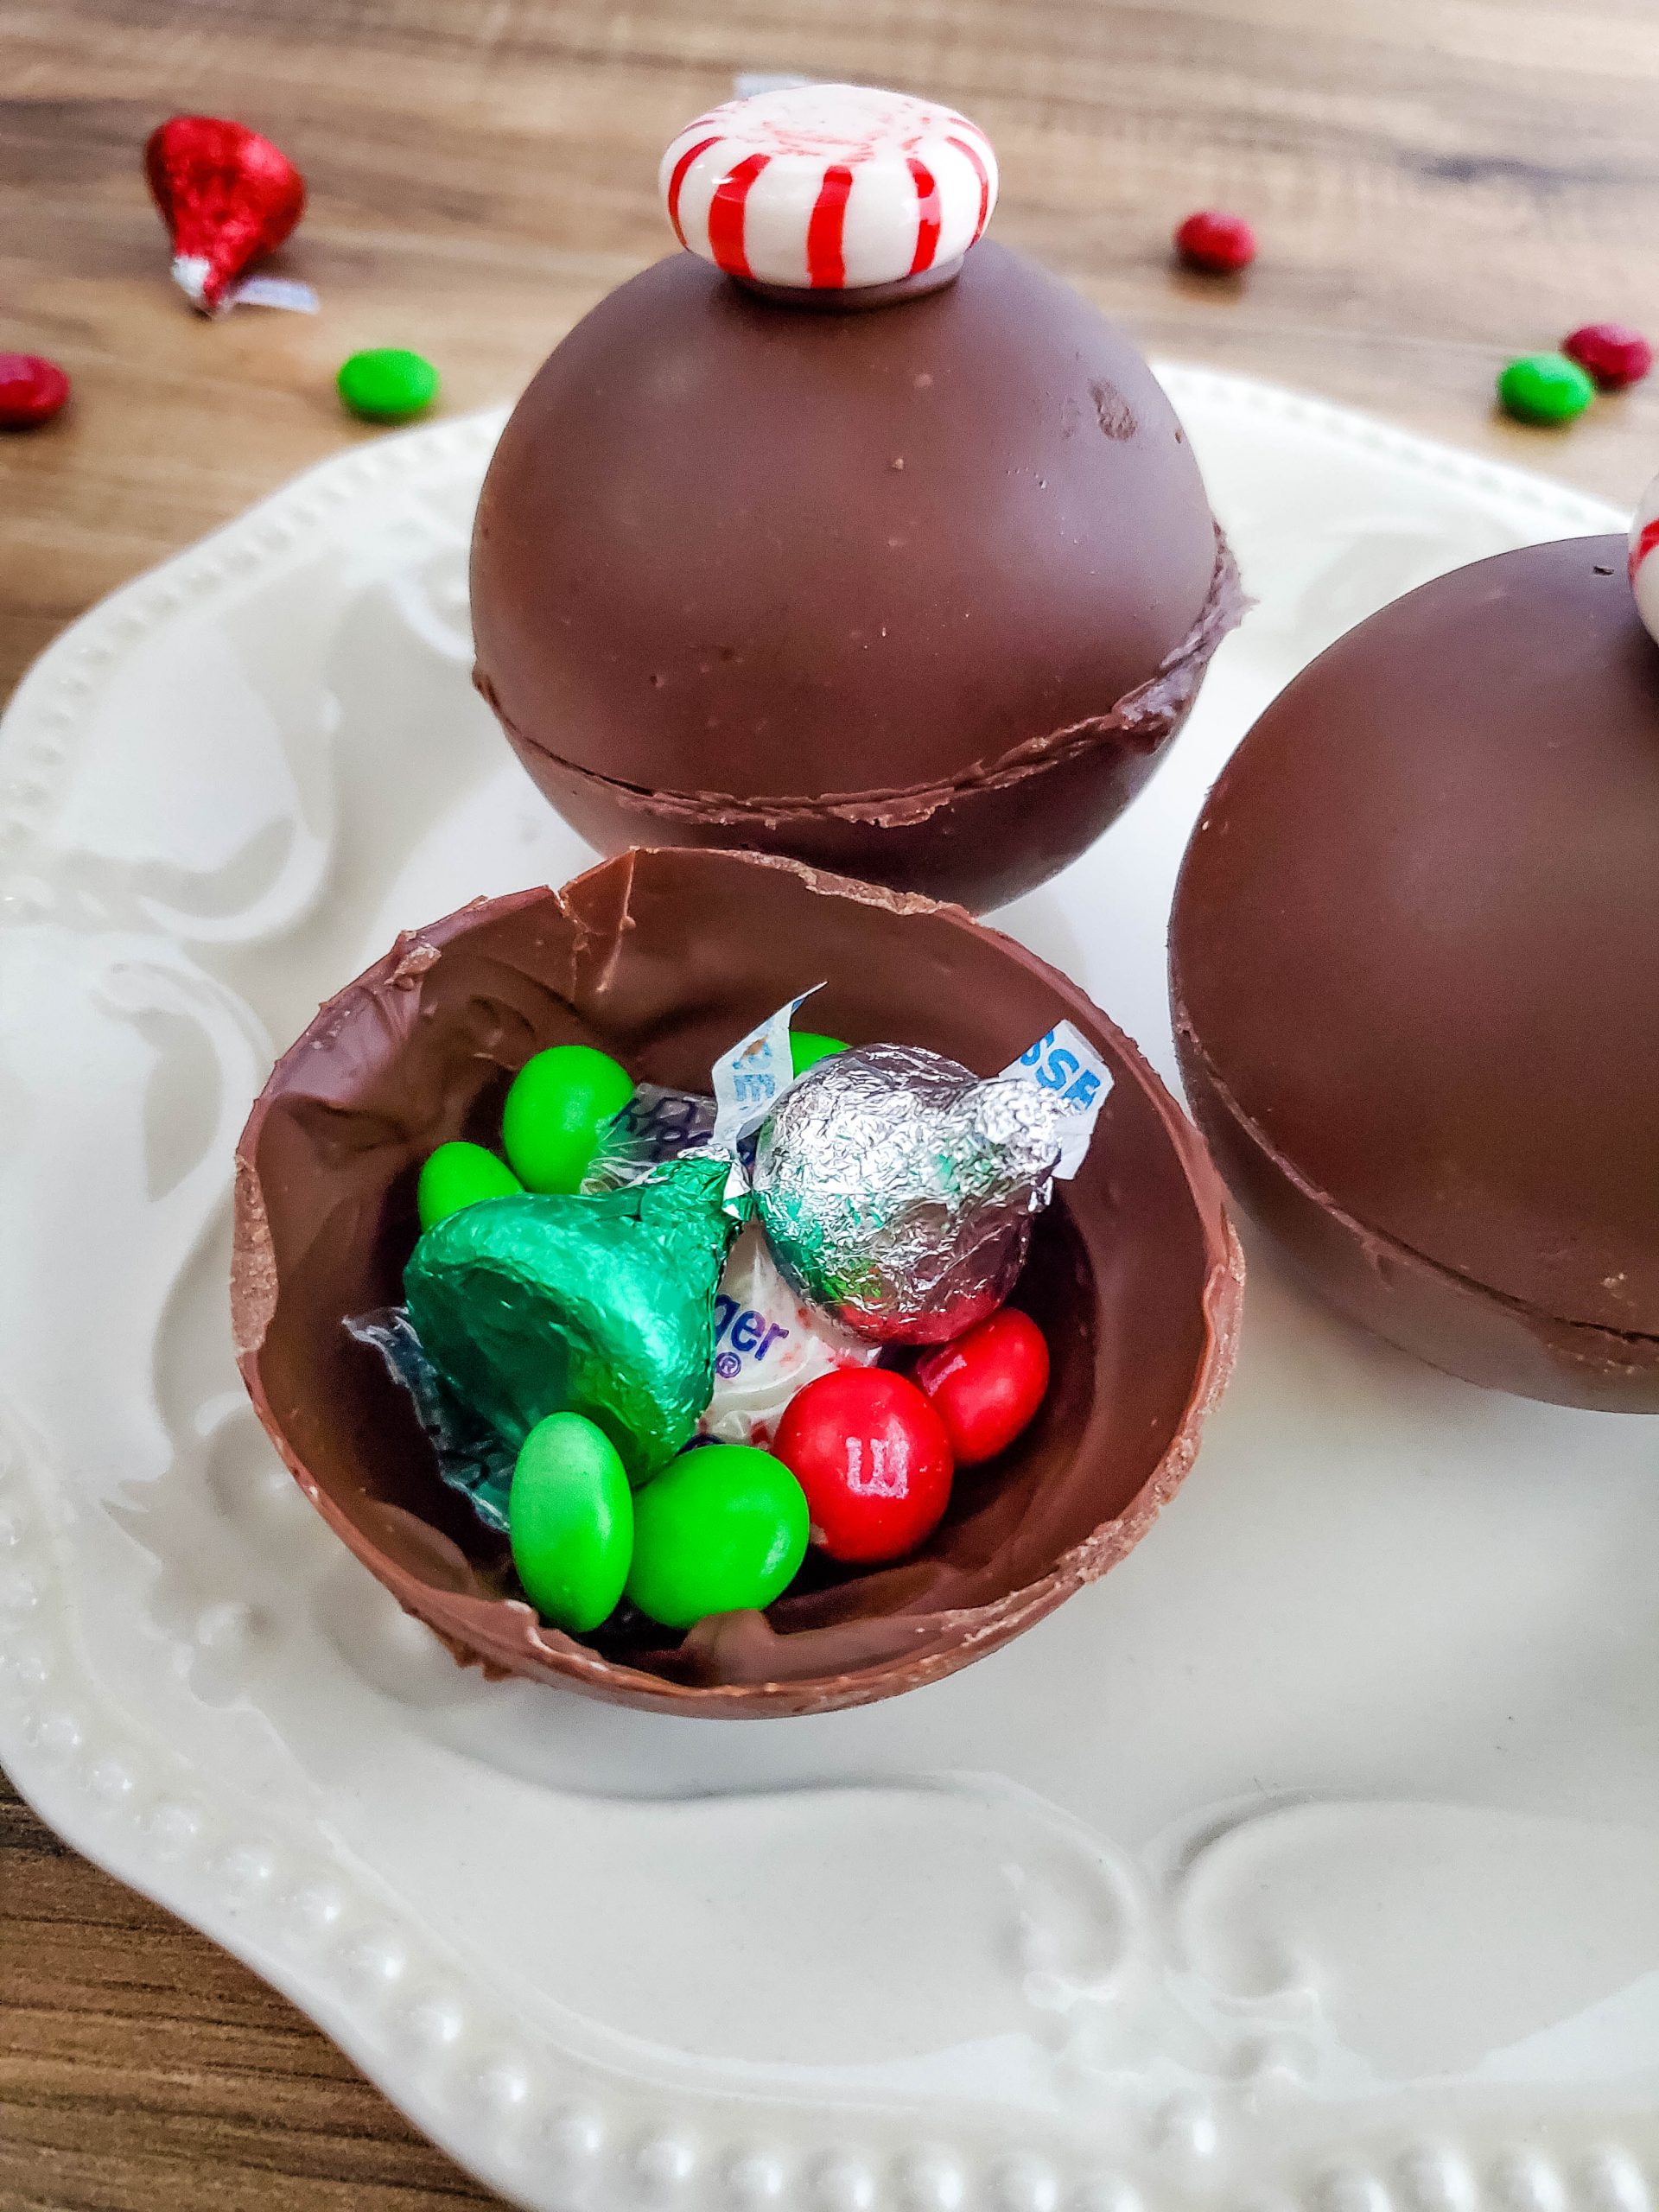 Breakable Chocolate Balls with Candy Inside hollow chocolate ball with candy inside